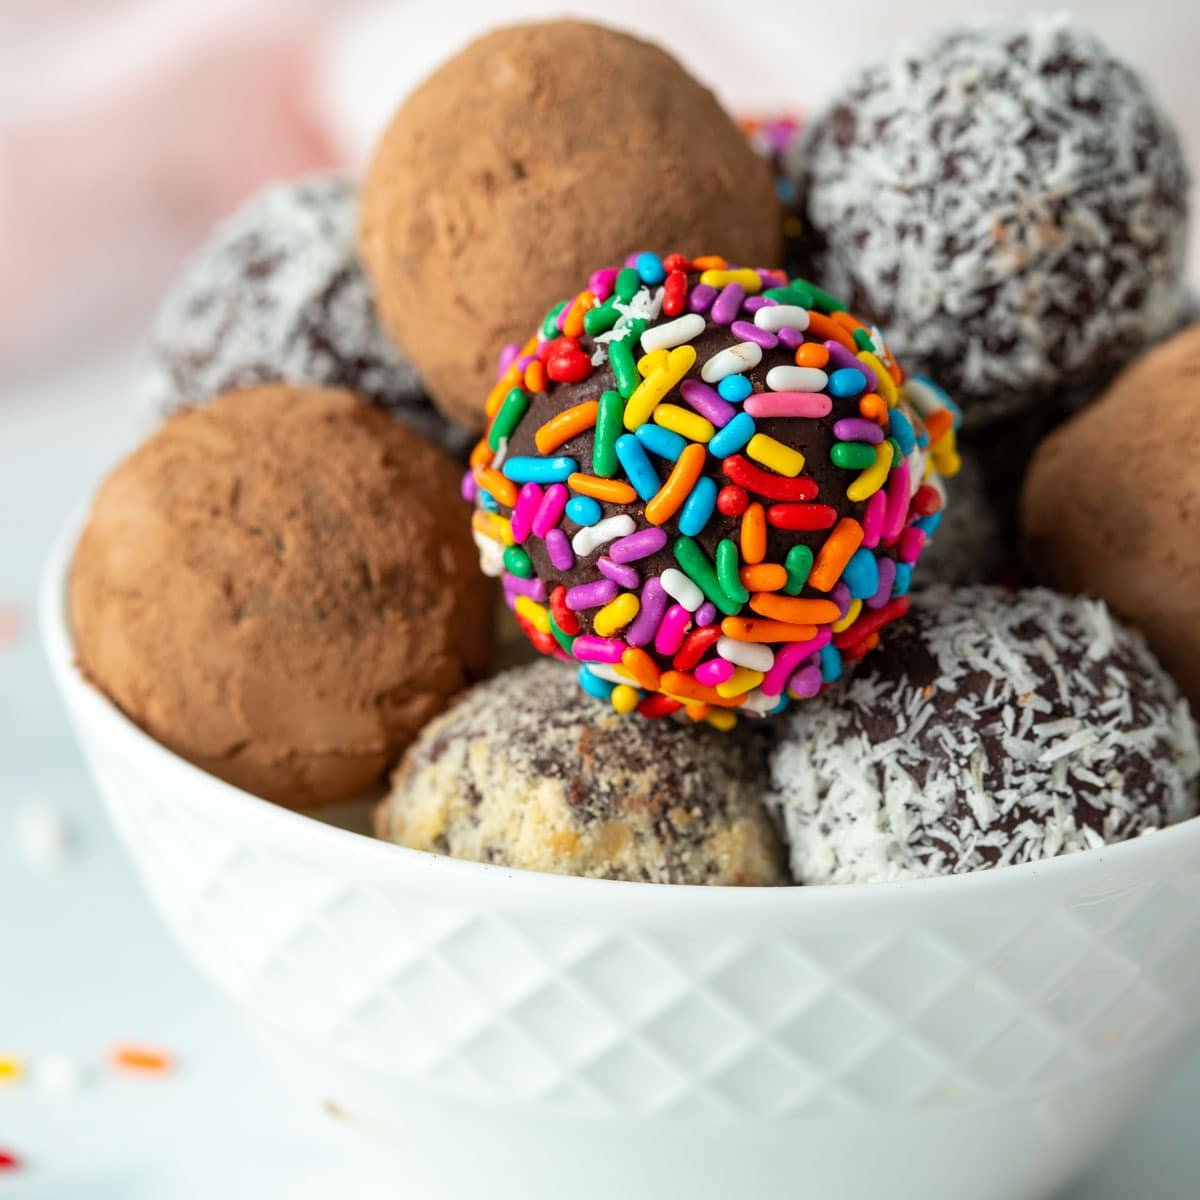 Assorted vegan chocolate truffles in a small bowl.